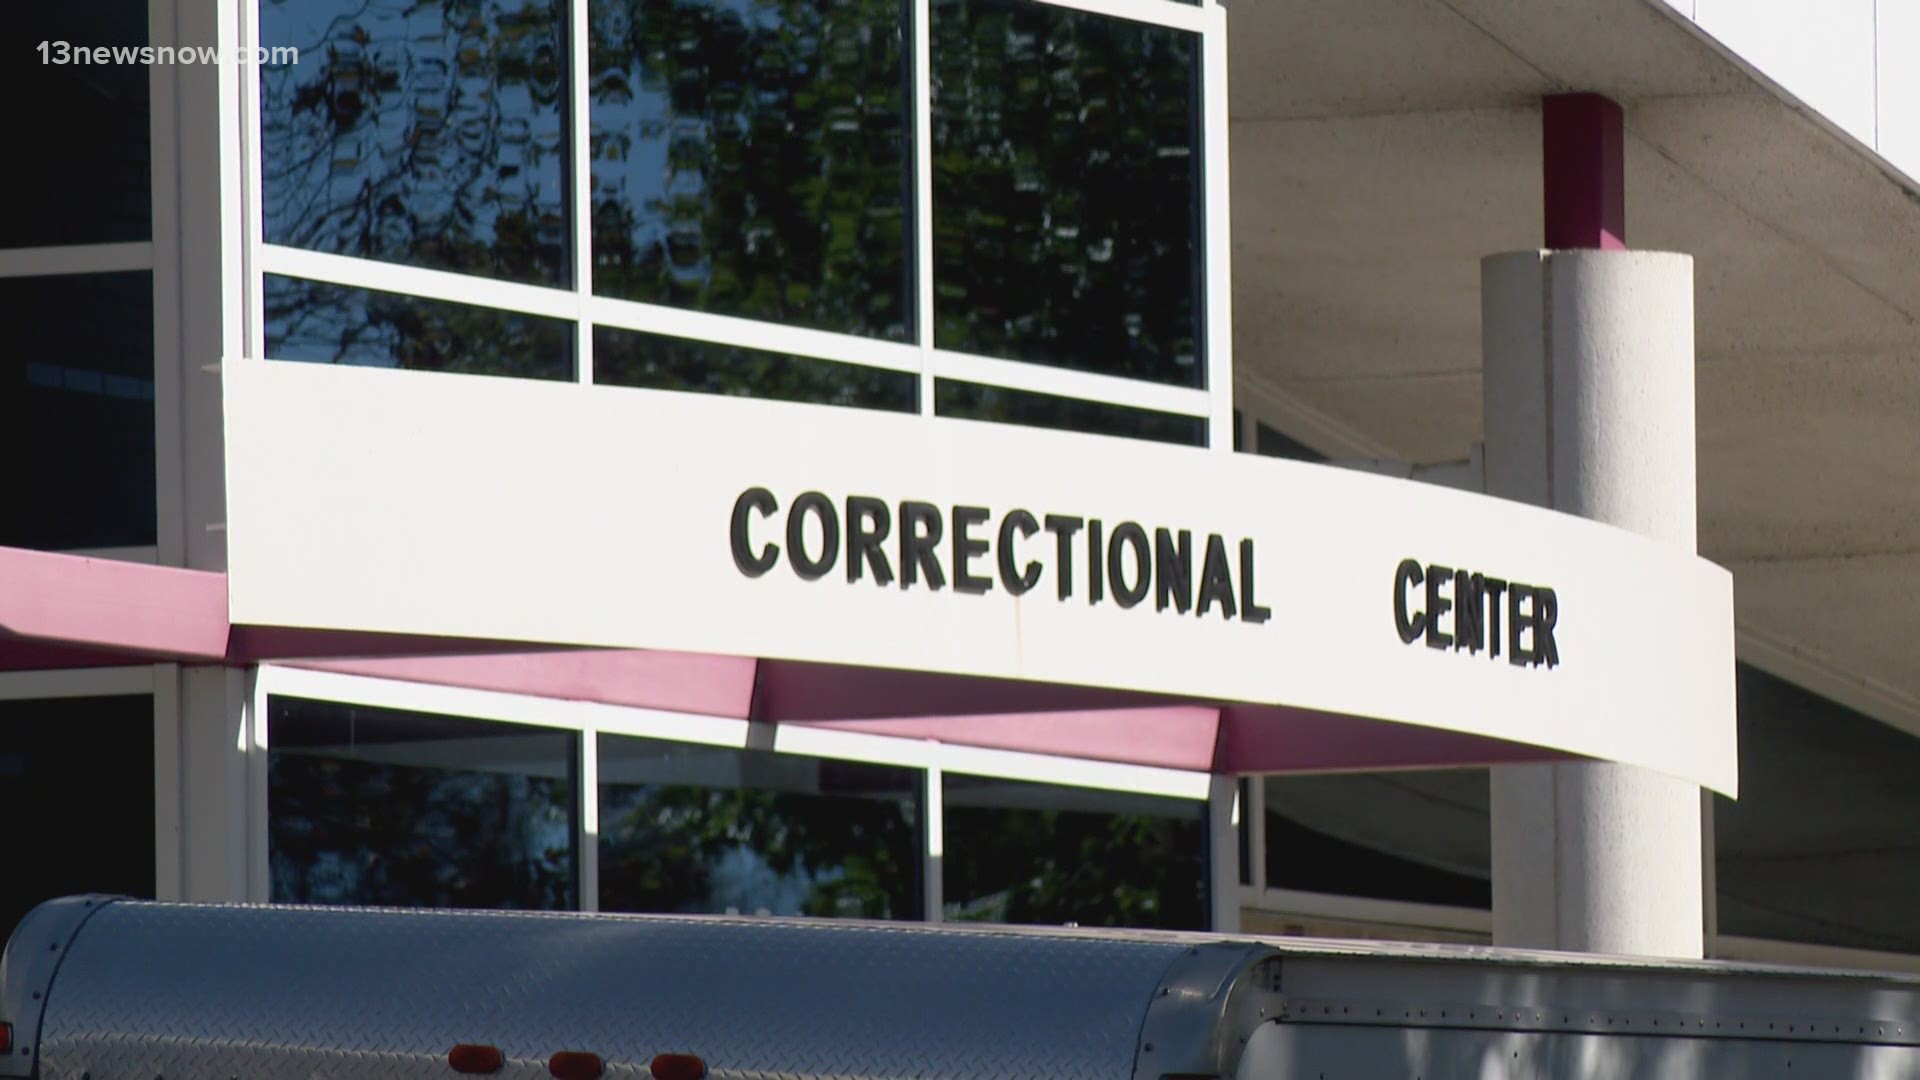 The City of Chesapeake Correctional Center is seeing  an increase in coronavirus cases. The city's sheriff's office said 90 inmates have tested positive.